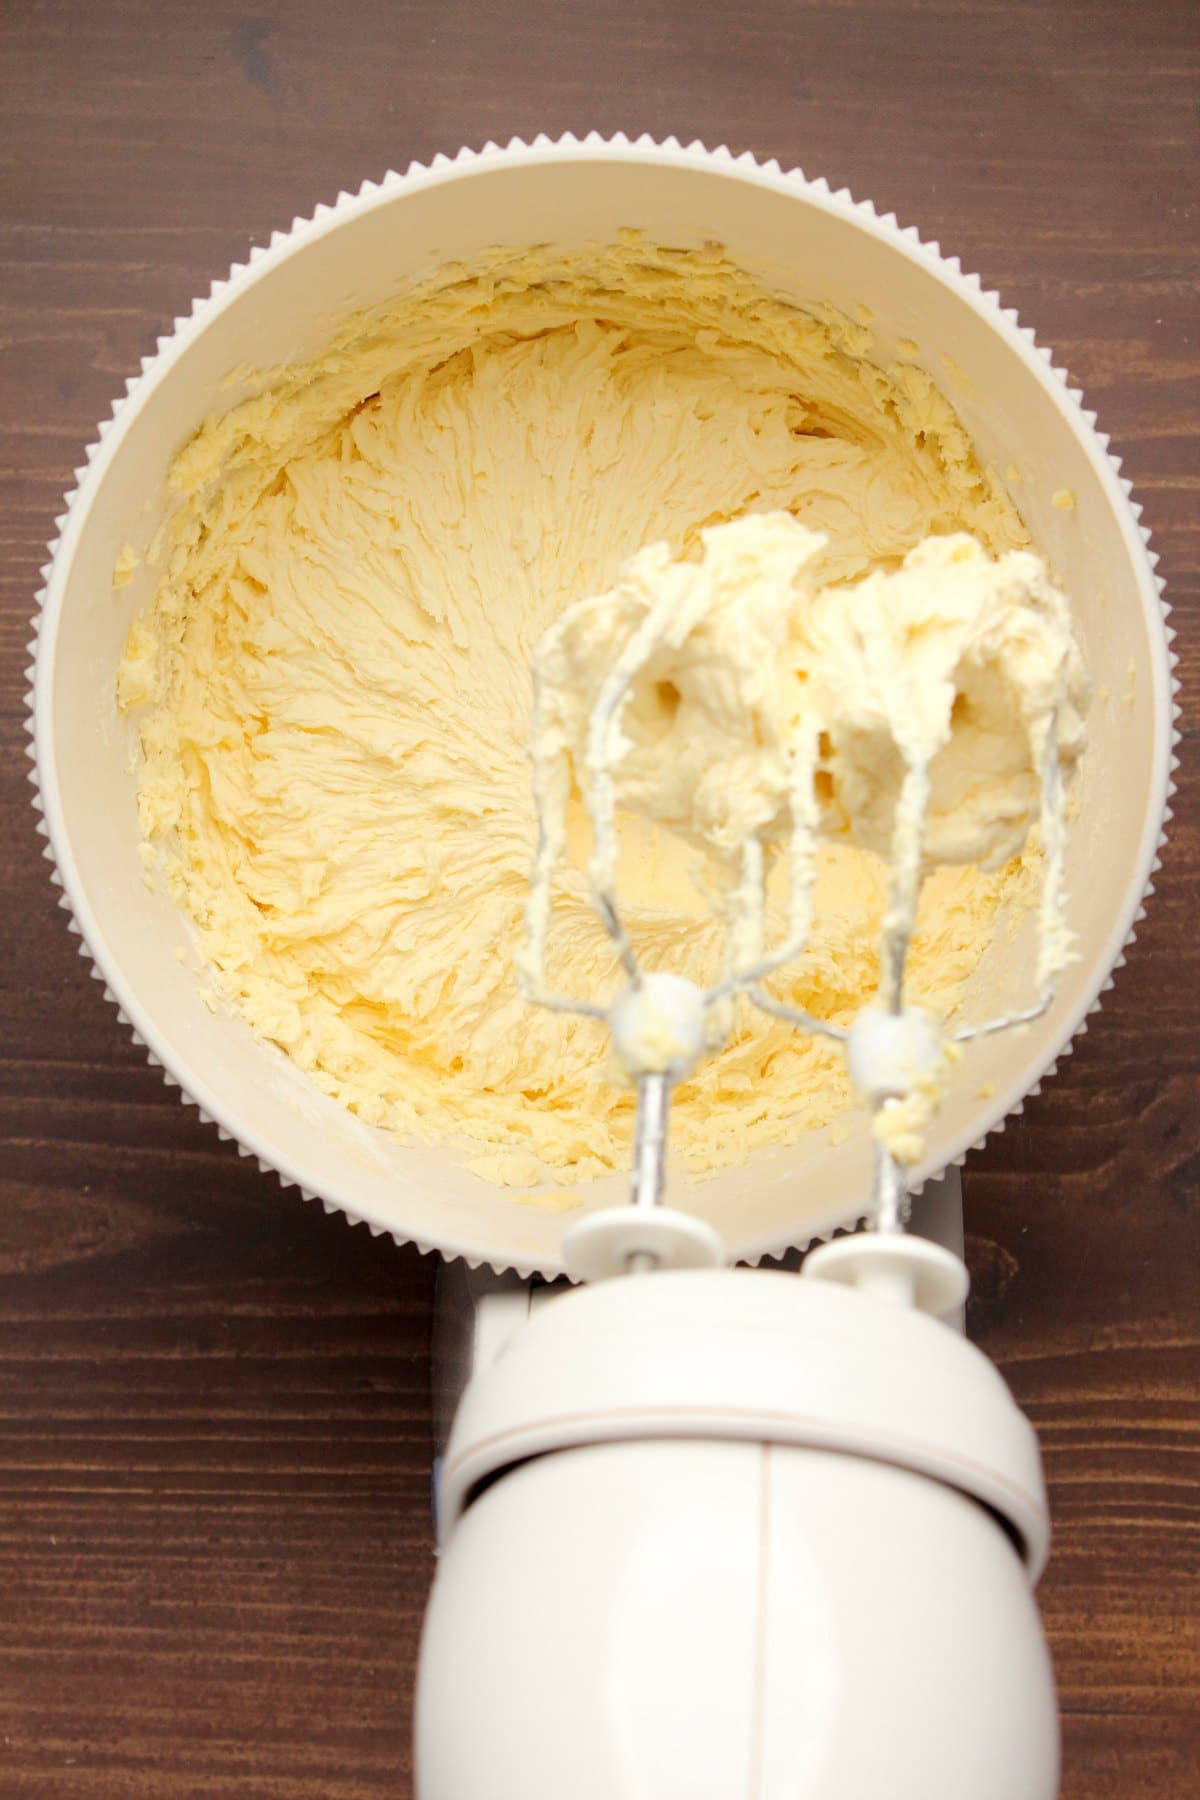 Vegan buttercream frosting in a stand mixer.